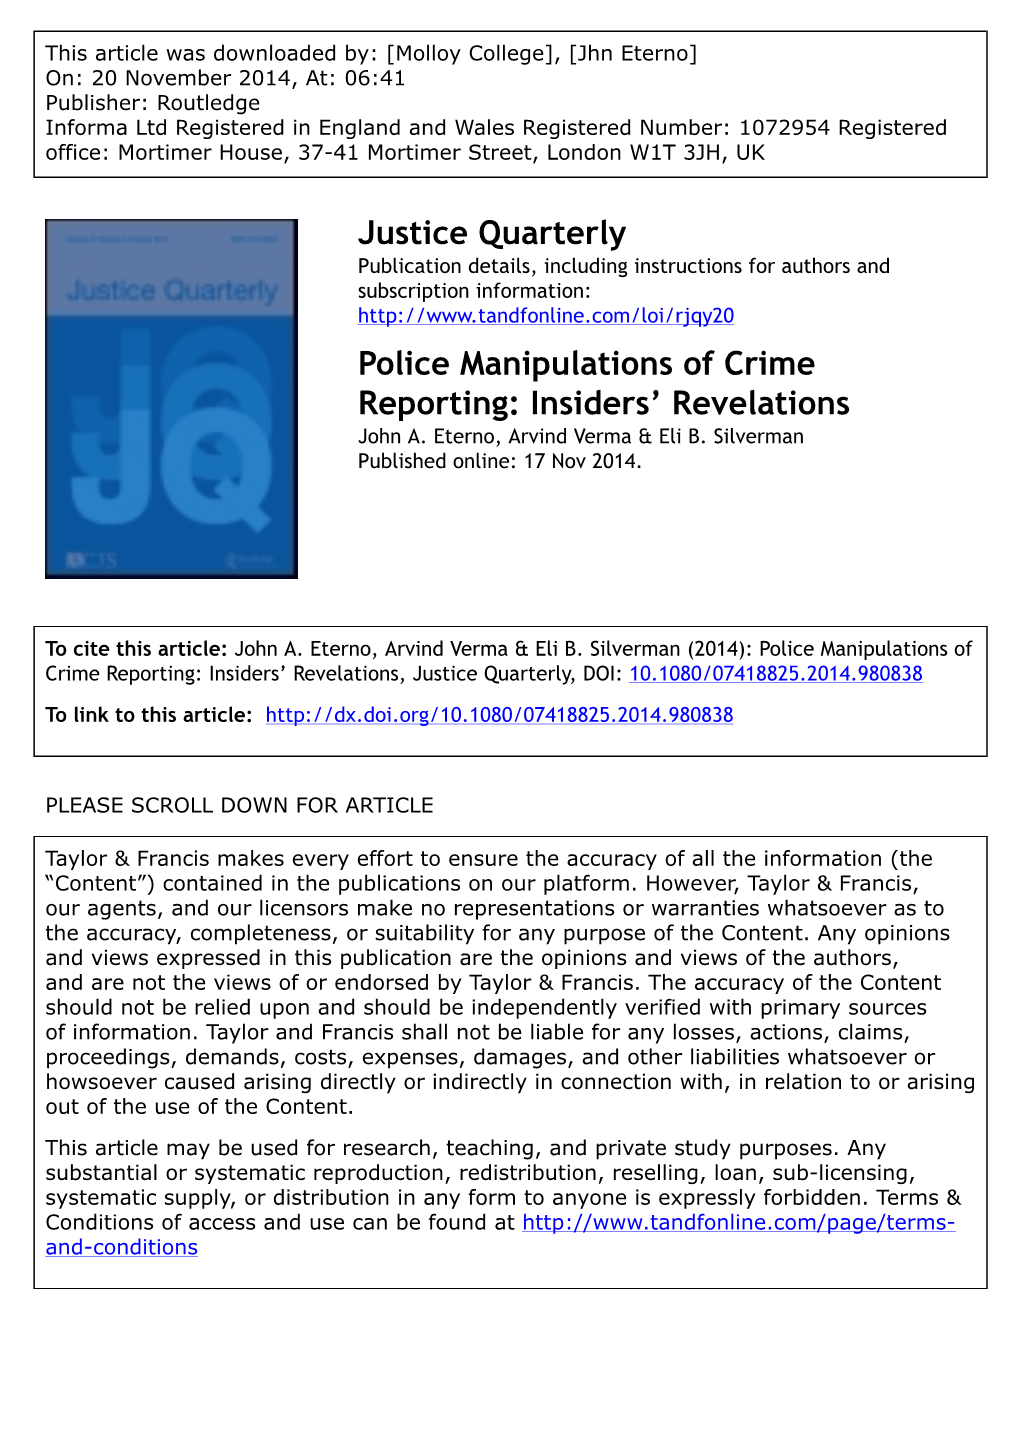 Police Manipulations of Crime Reporting: Insiders’ Revelations John A